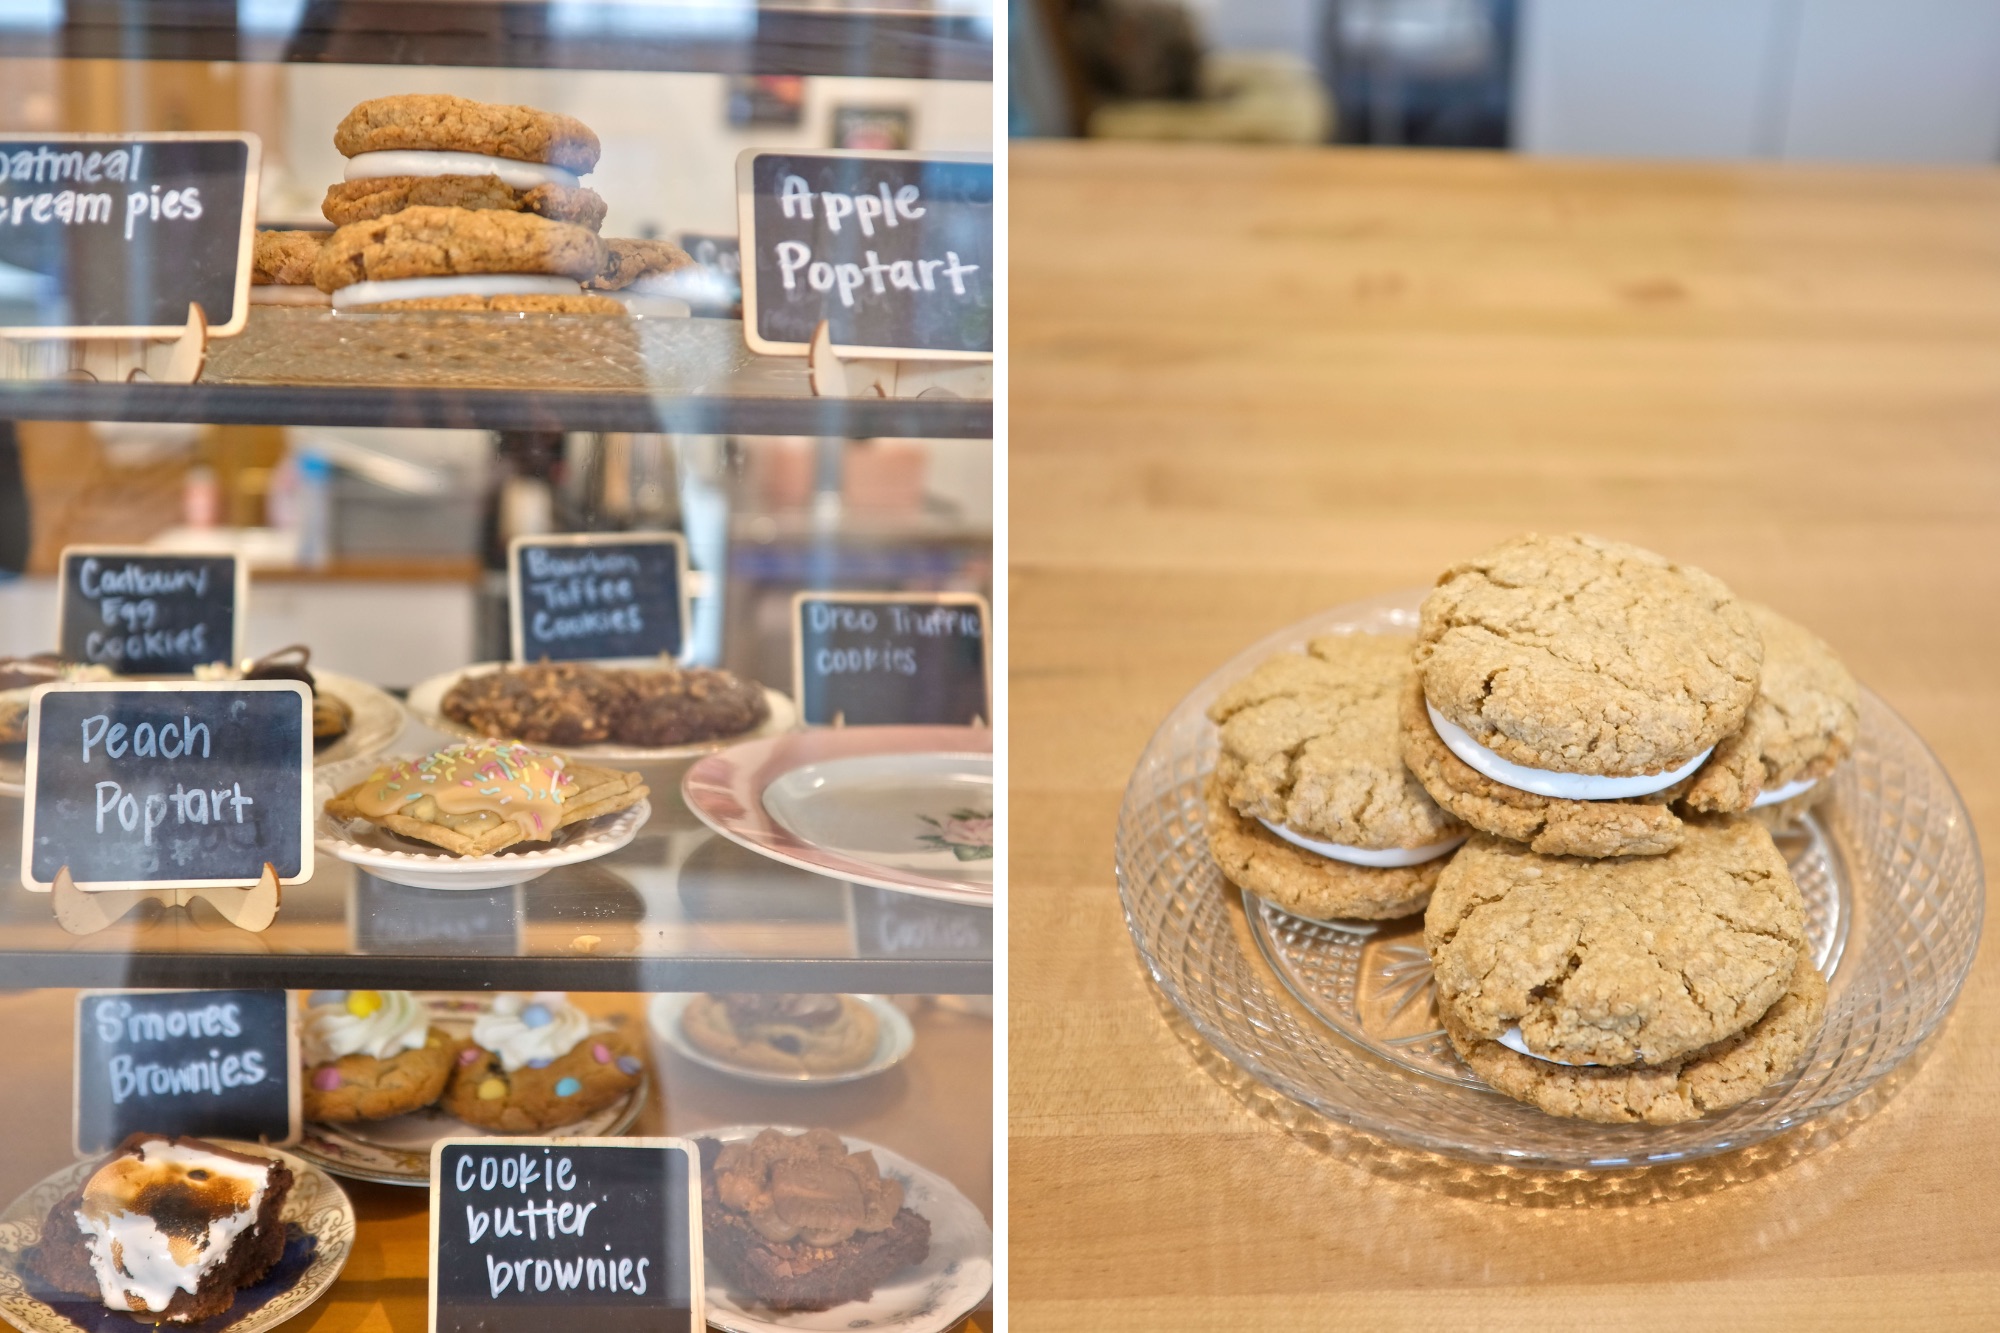 The pastry case at The Batch House and a tray of oatmeal cream pies